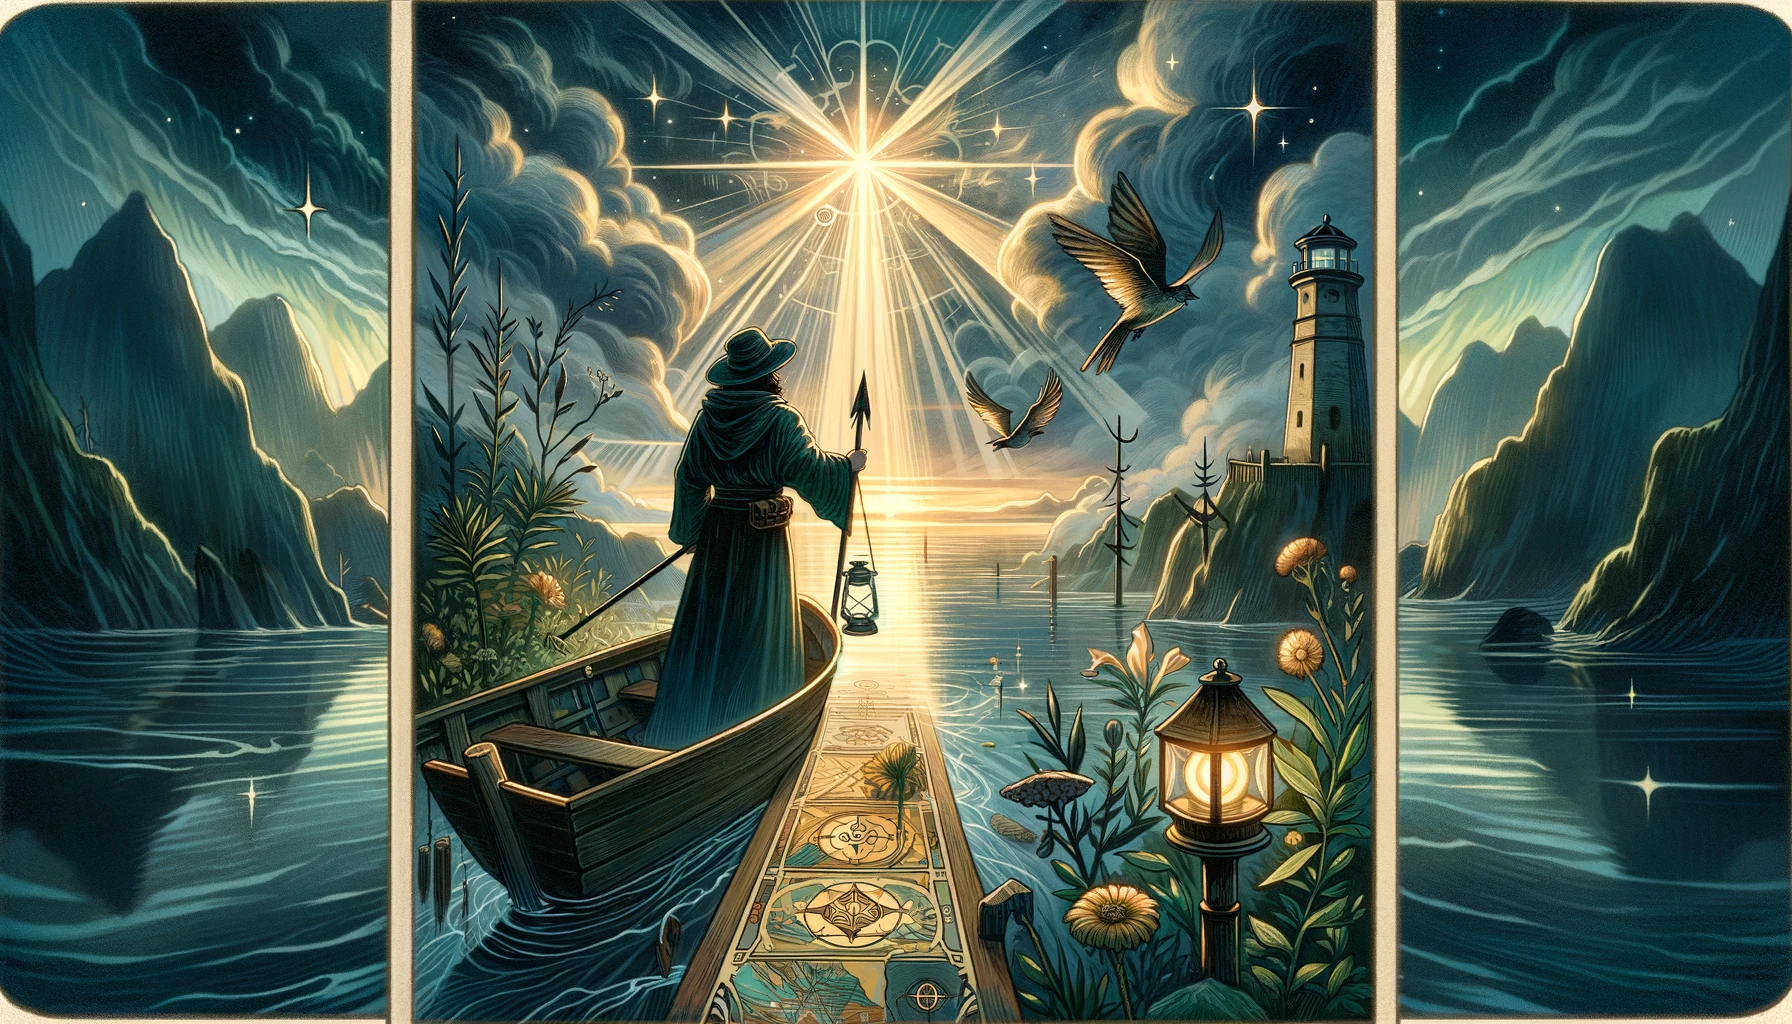 "Illustration depicting a guiding figure leading others through transition and healing, symbolizing a journey from darkness to light, chaos to order, and offering hope for a brighter future."